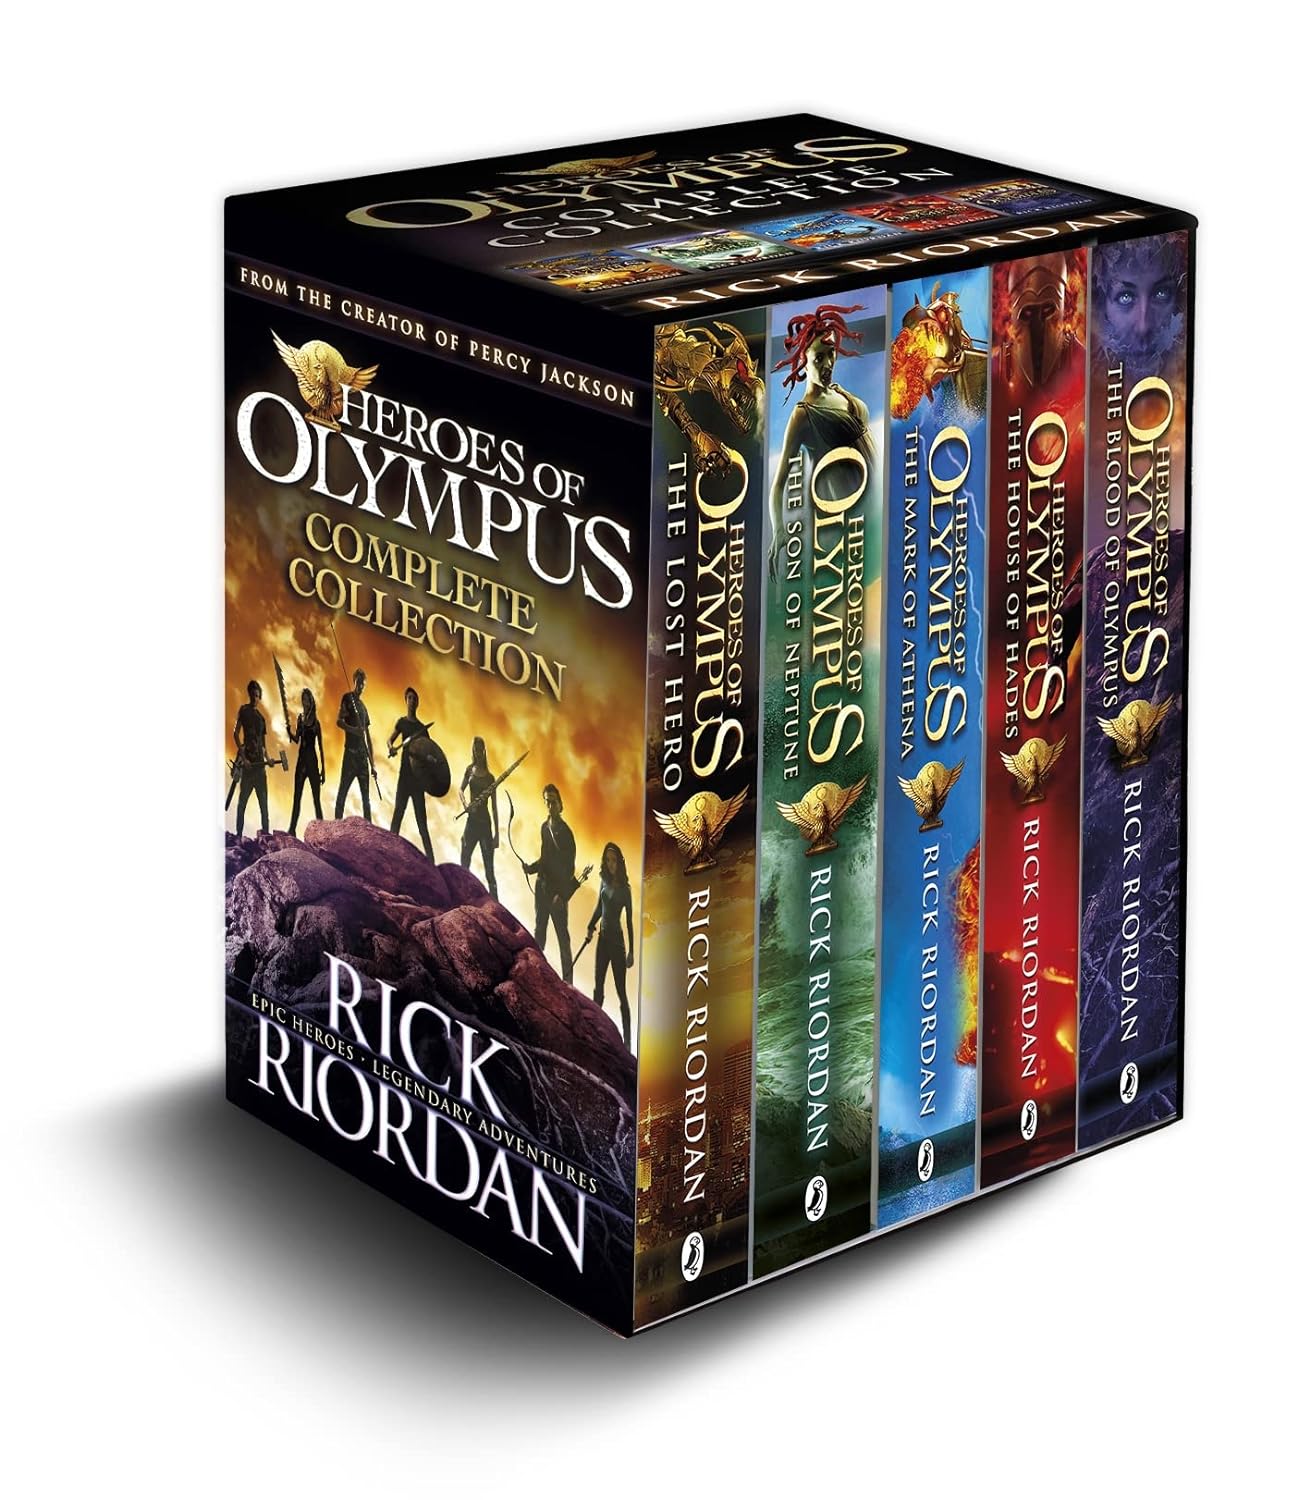 Heroes of Olympus Complete Collection (5 Book Slipcase) by Rick Riordan